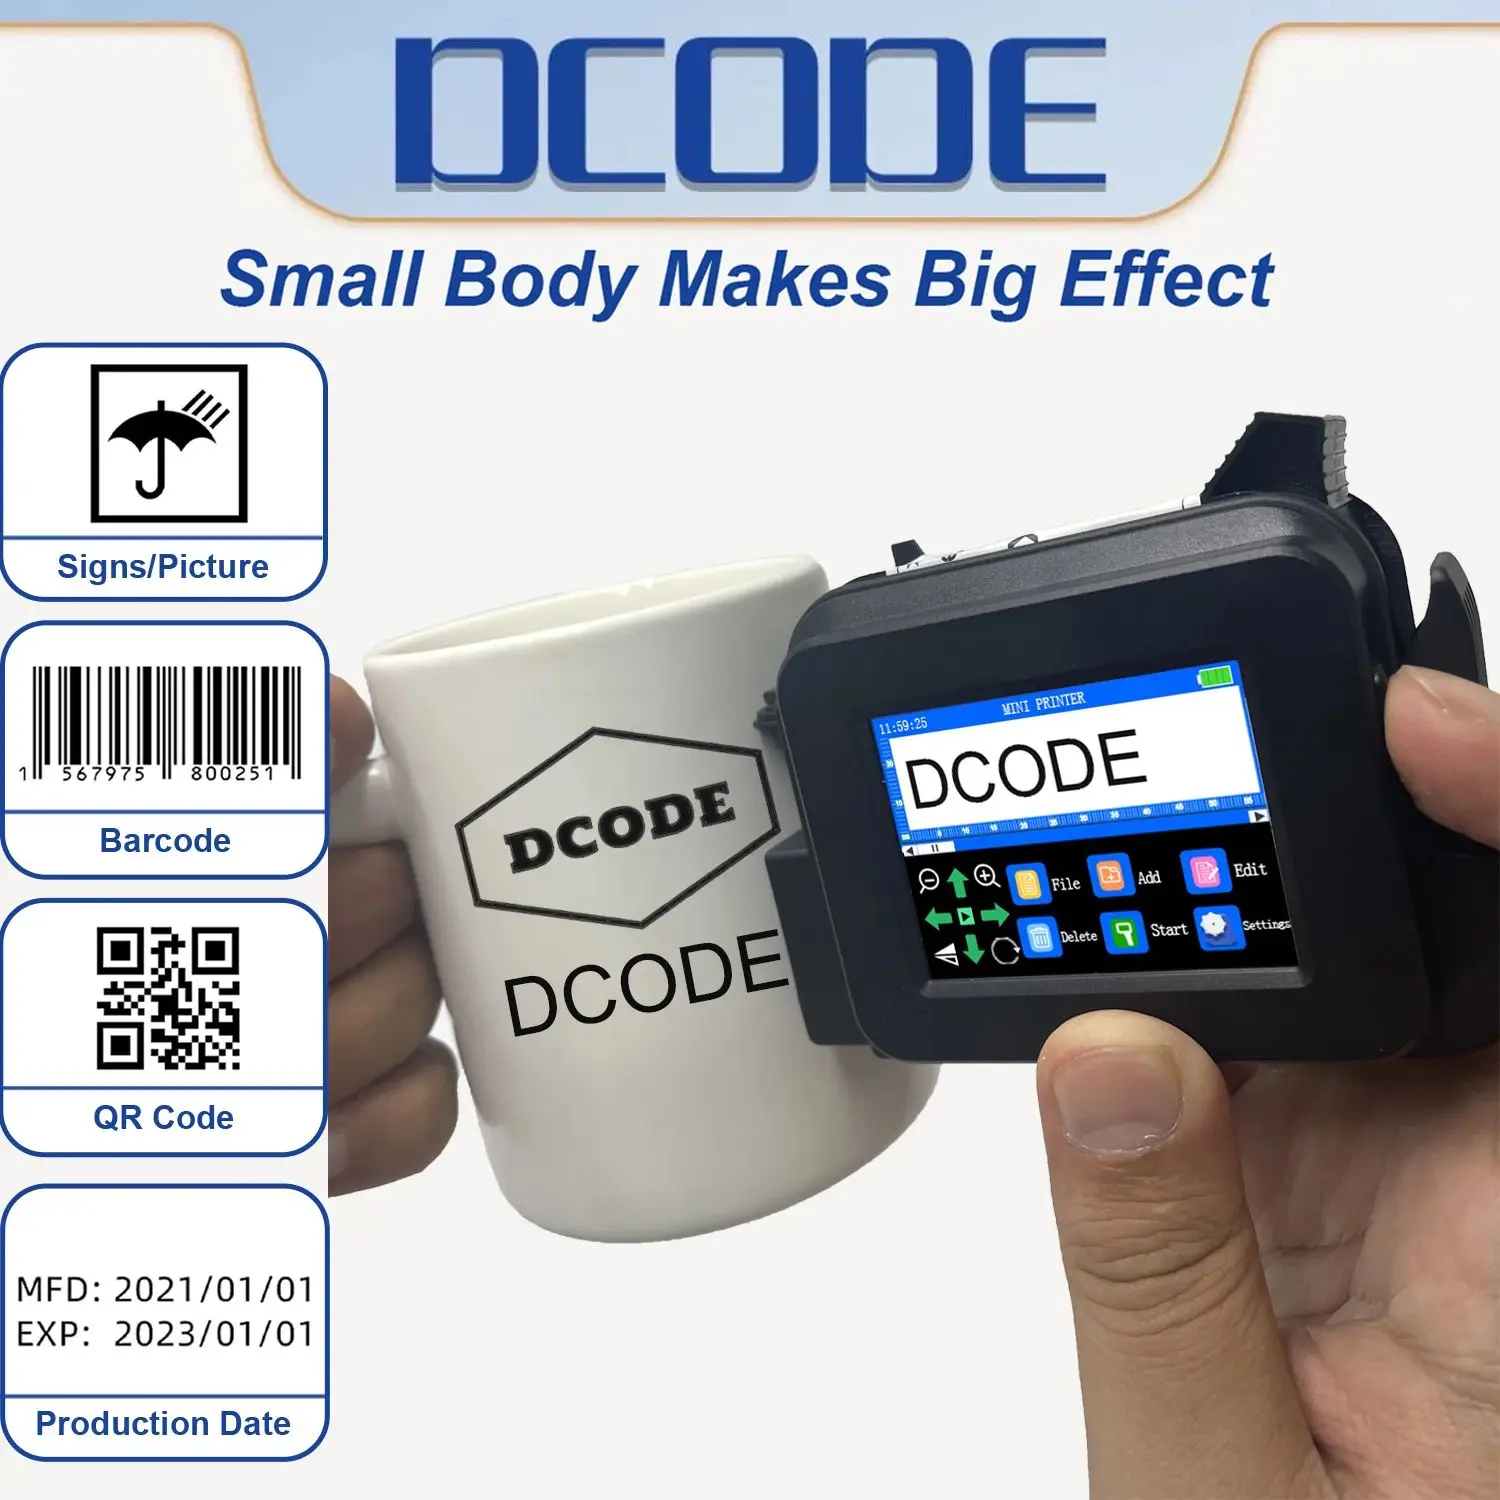 

DCODE 12.7MM XMINI Portable Coder Handheld Inkjet Printer for Text QR Barcode Batch Number Logo Date Label with Fast-Dry Ink